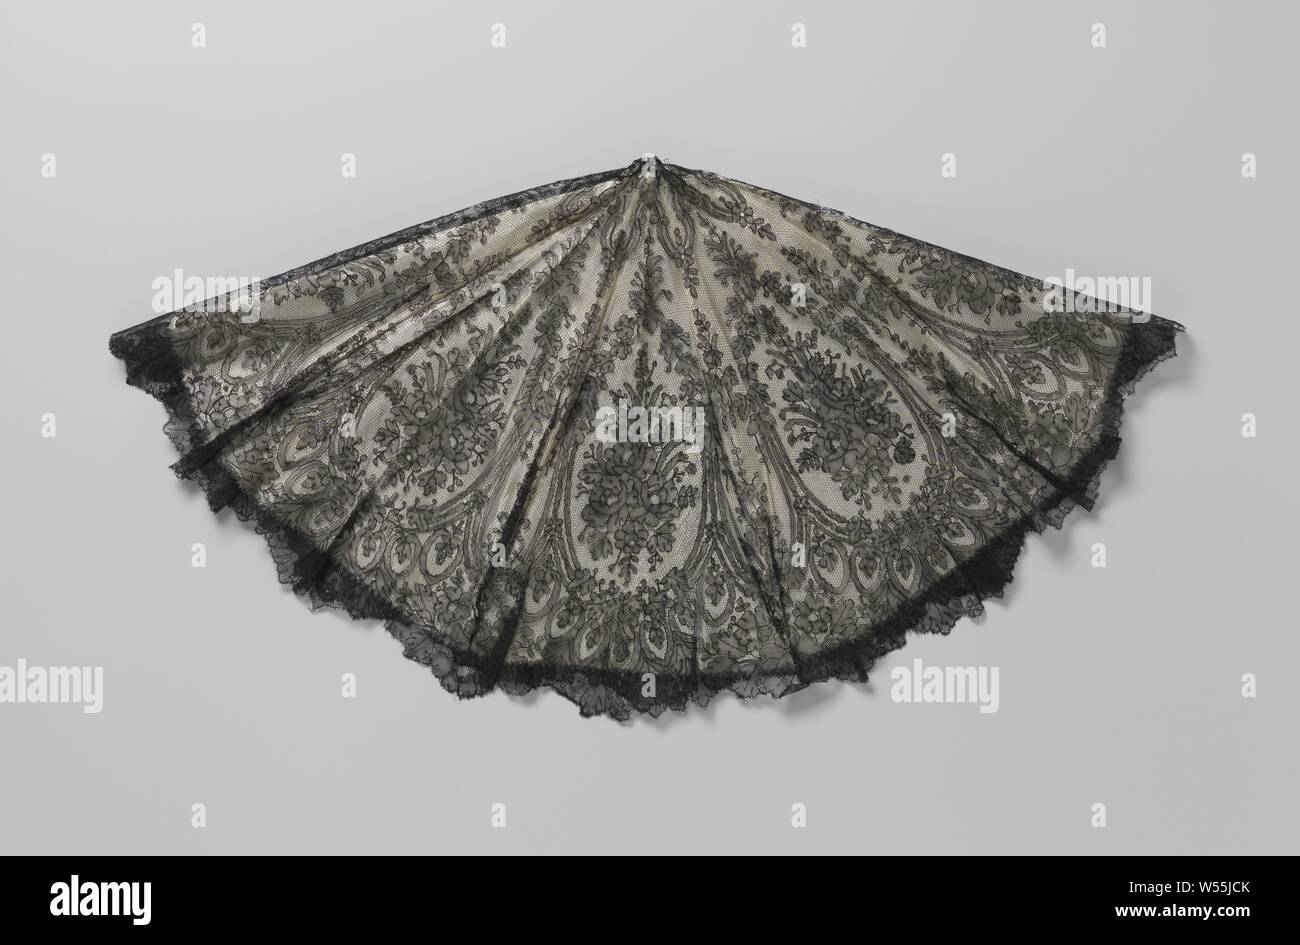 Parasol cover made of spool lace with pointed oval, Parasol cover made of black spool lace: Chantilly lace. There are pointed oval fields on eight sectors with an empty mesh stock, flanked by narrow pointed oval. The contours consist partly of ivy bars, partly of moldings, the fillings consist of a flower jug. Heart-shaped medallions and an edge of oak leaves form wide scallops, a rose encased in two leaves forms small scallops. On the top is a separate pumpkin from the same side., anonymous, Belgium, c. 1850 - c. 1870, silk, bobbin lace, d 68 cm Stock Photo